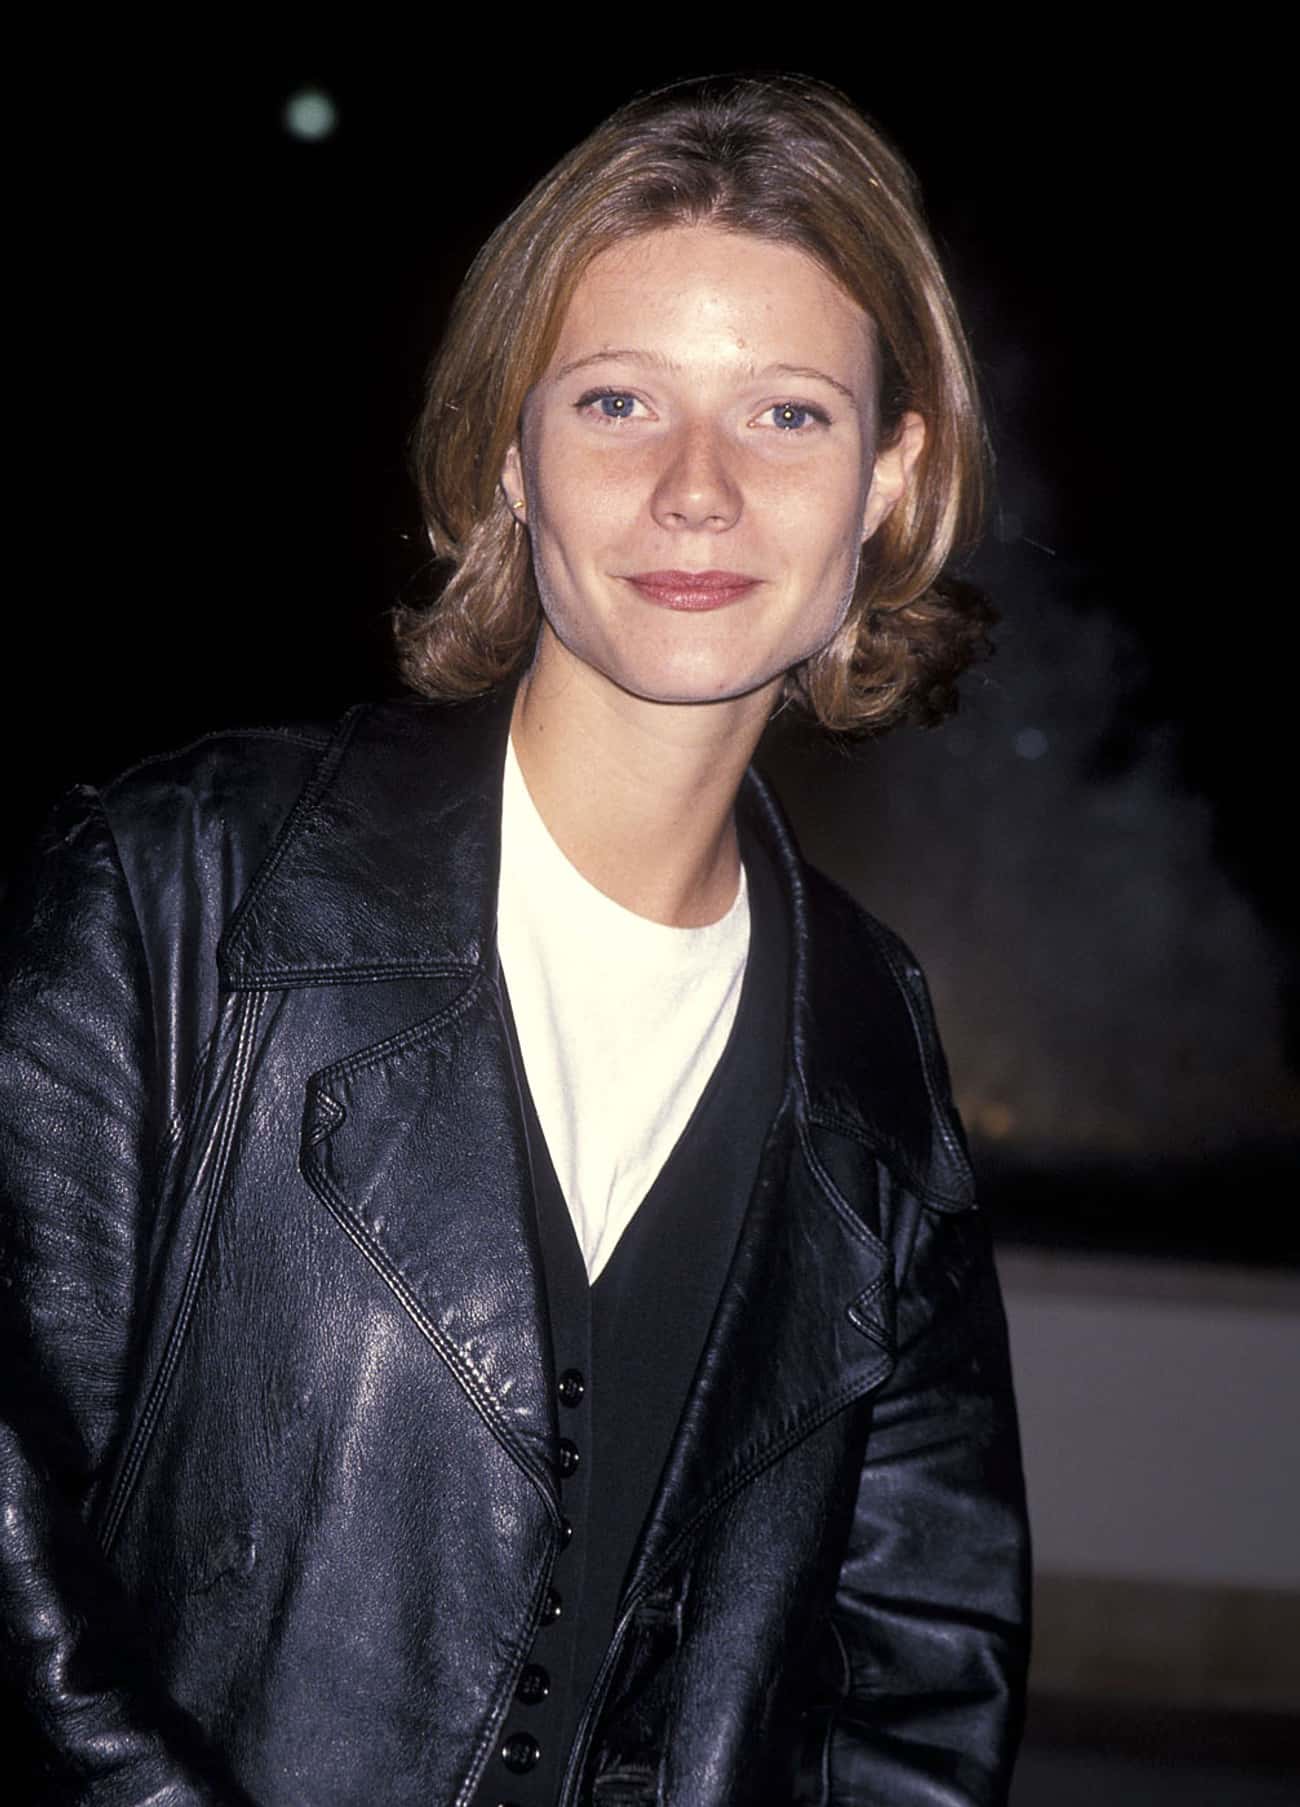 Young Gwyneth Paltrow in Black Leather Jacket and White T-Shirt